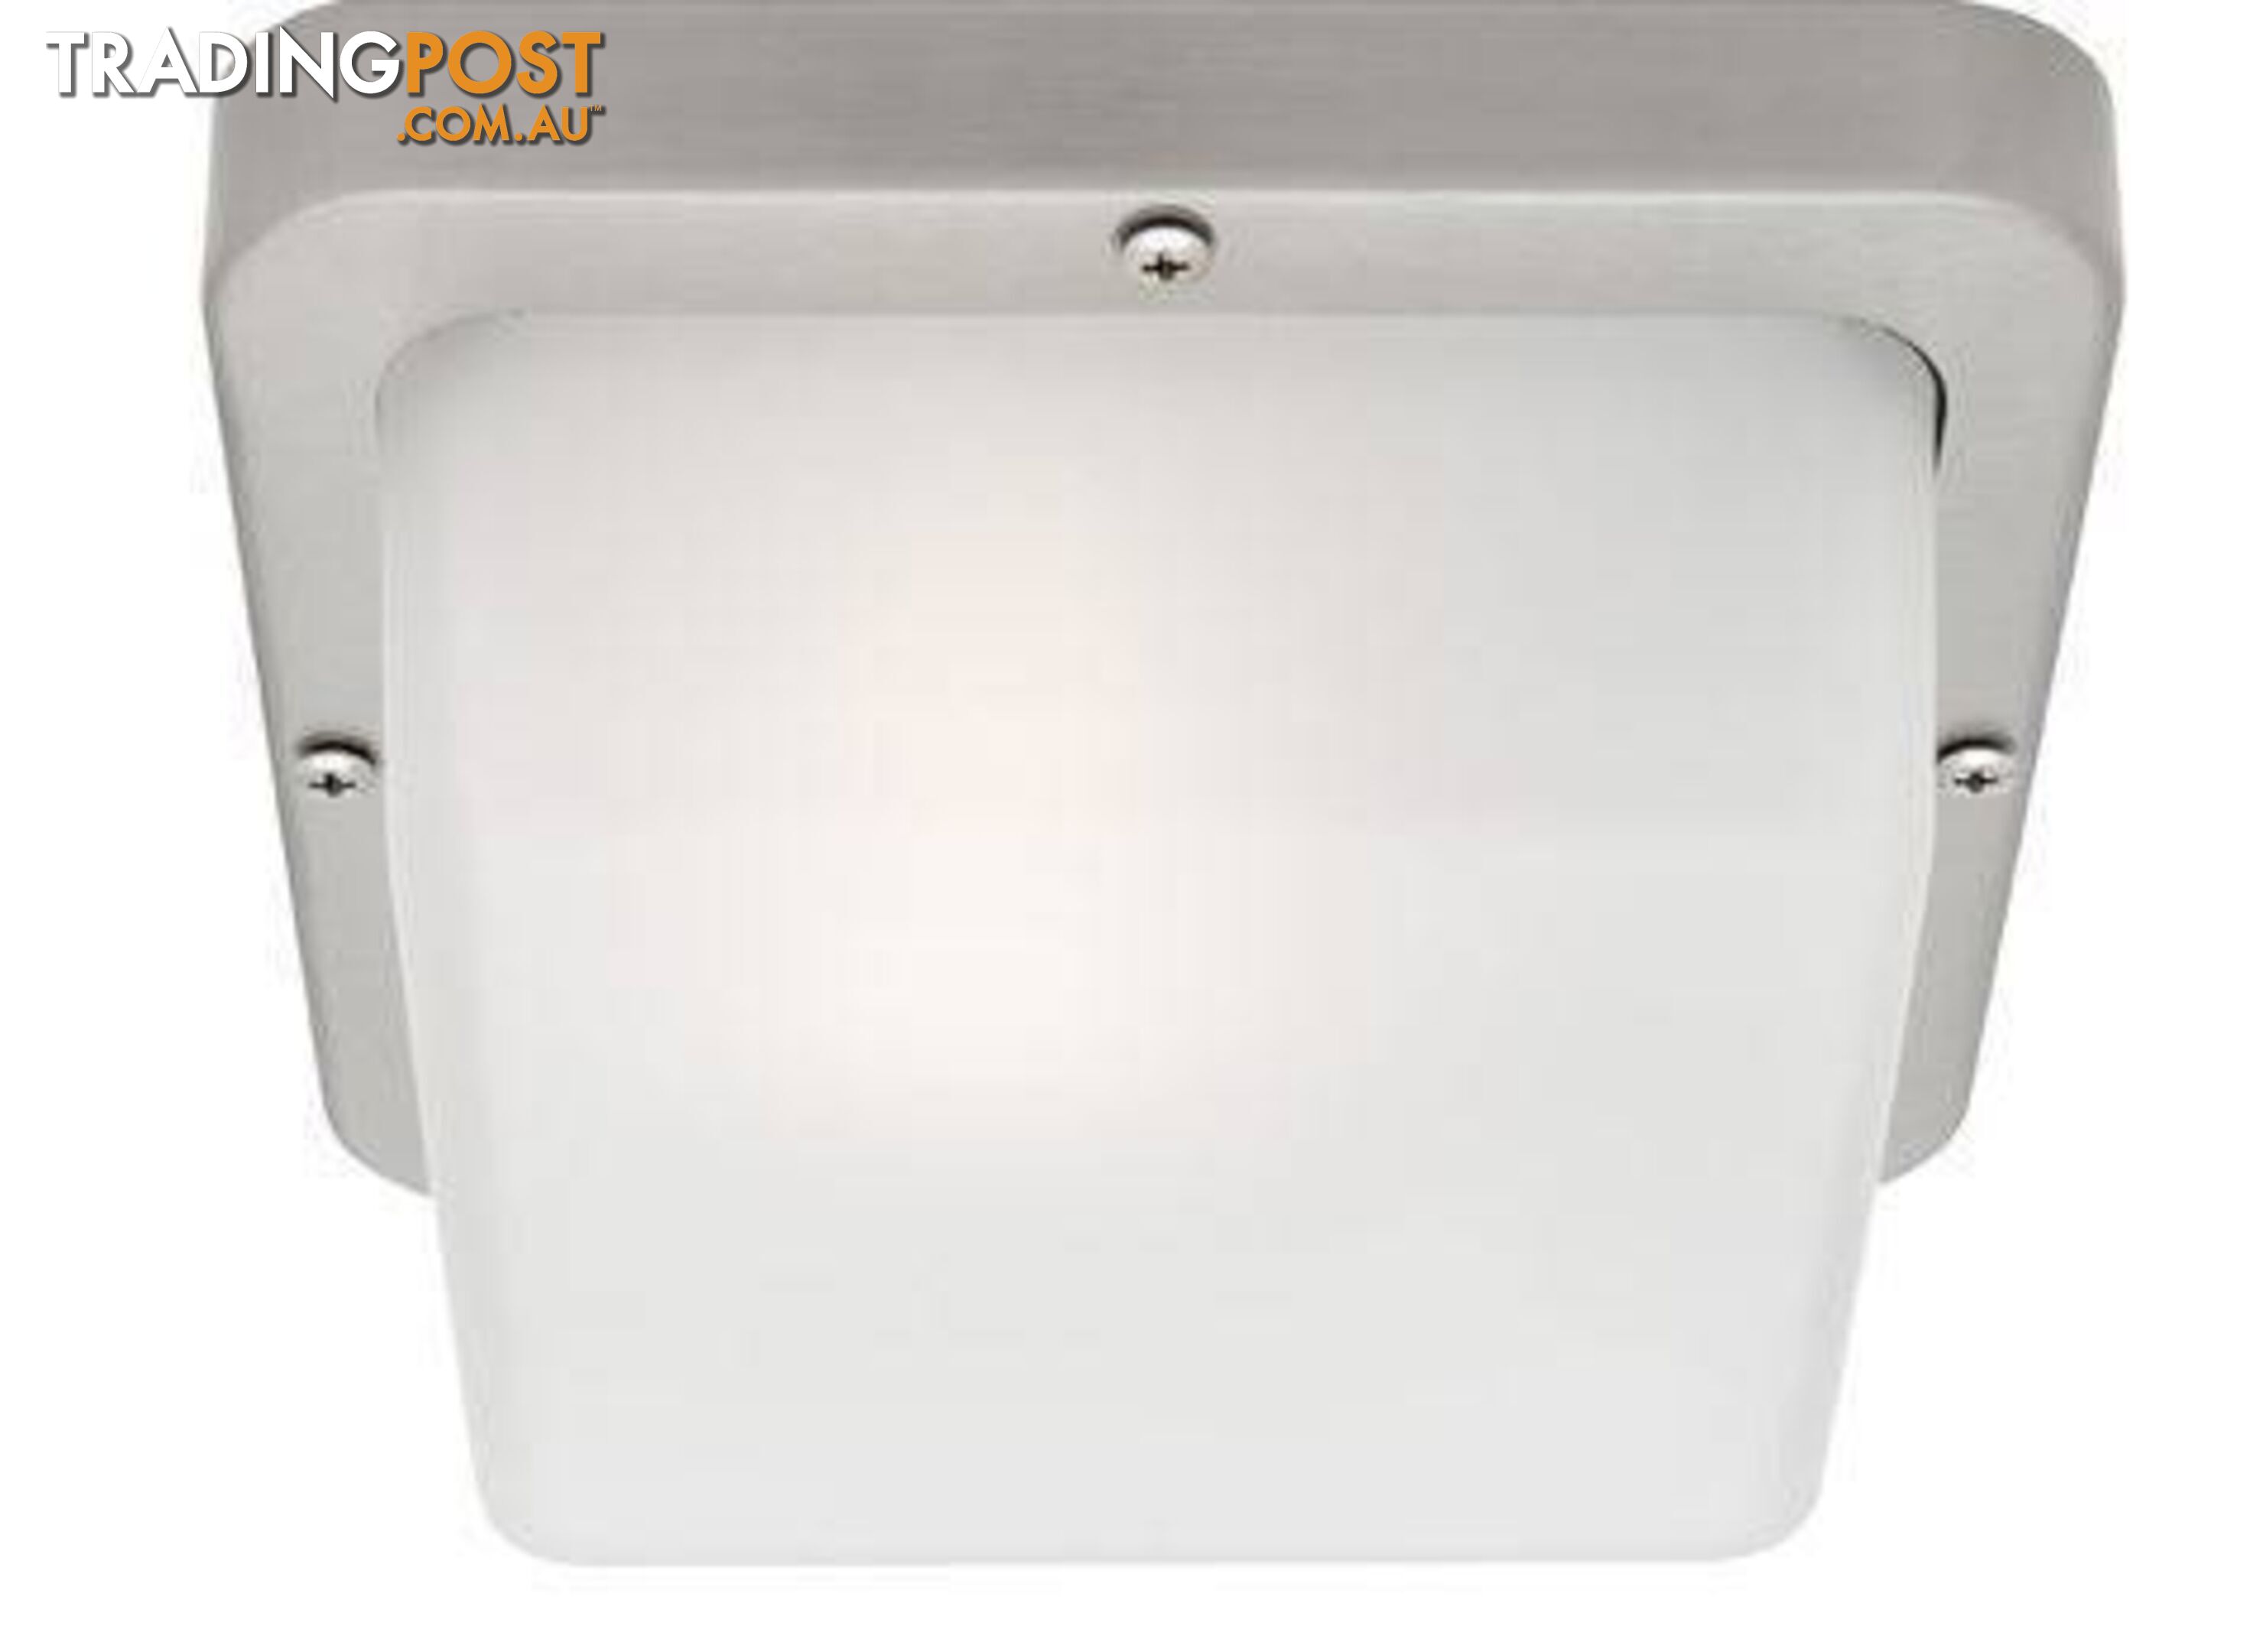 BUNKER & WALL LIGHTS (new) From: $15